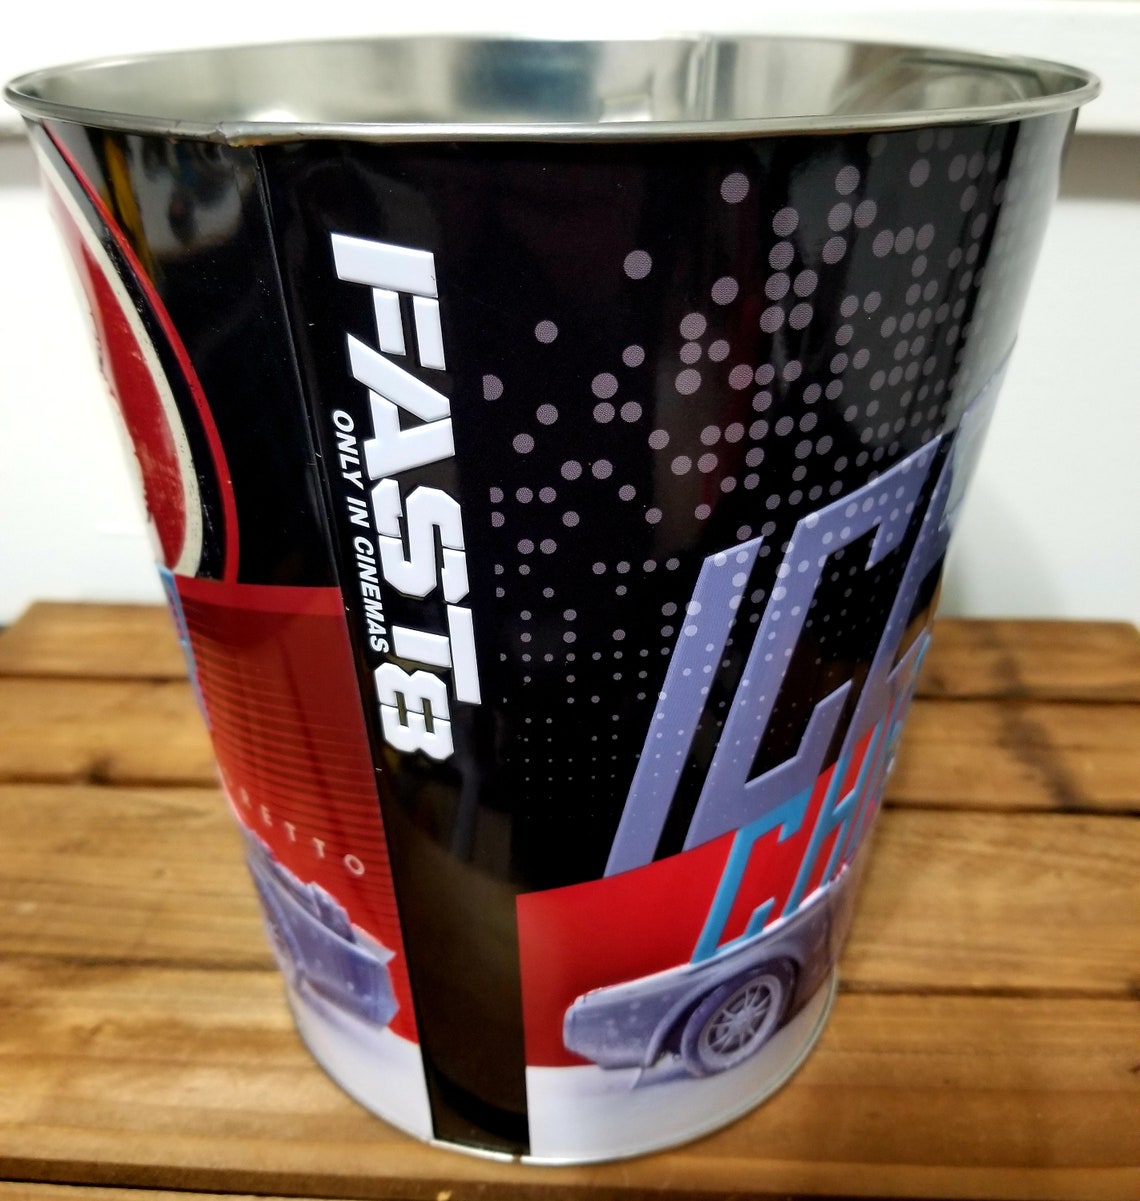 Fast 8 Popcorn Tub Fast and Furious Etsy